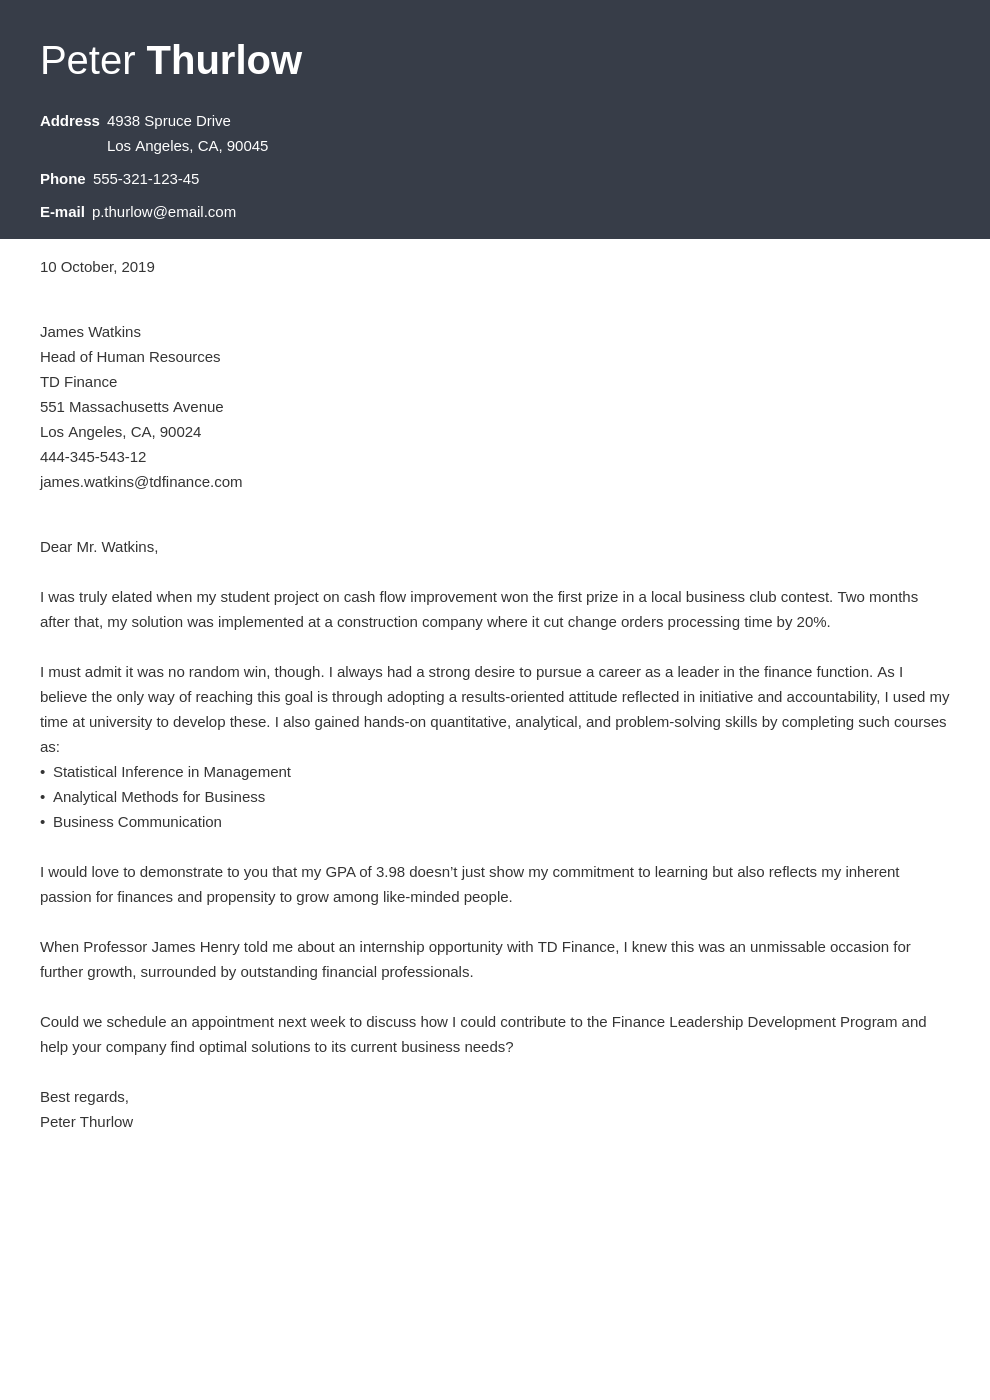 Cover Letter for an Internship: Example & Writing Guide